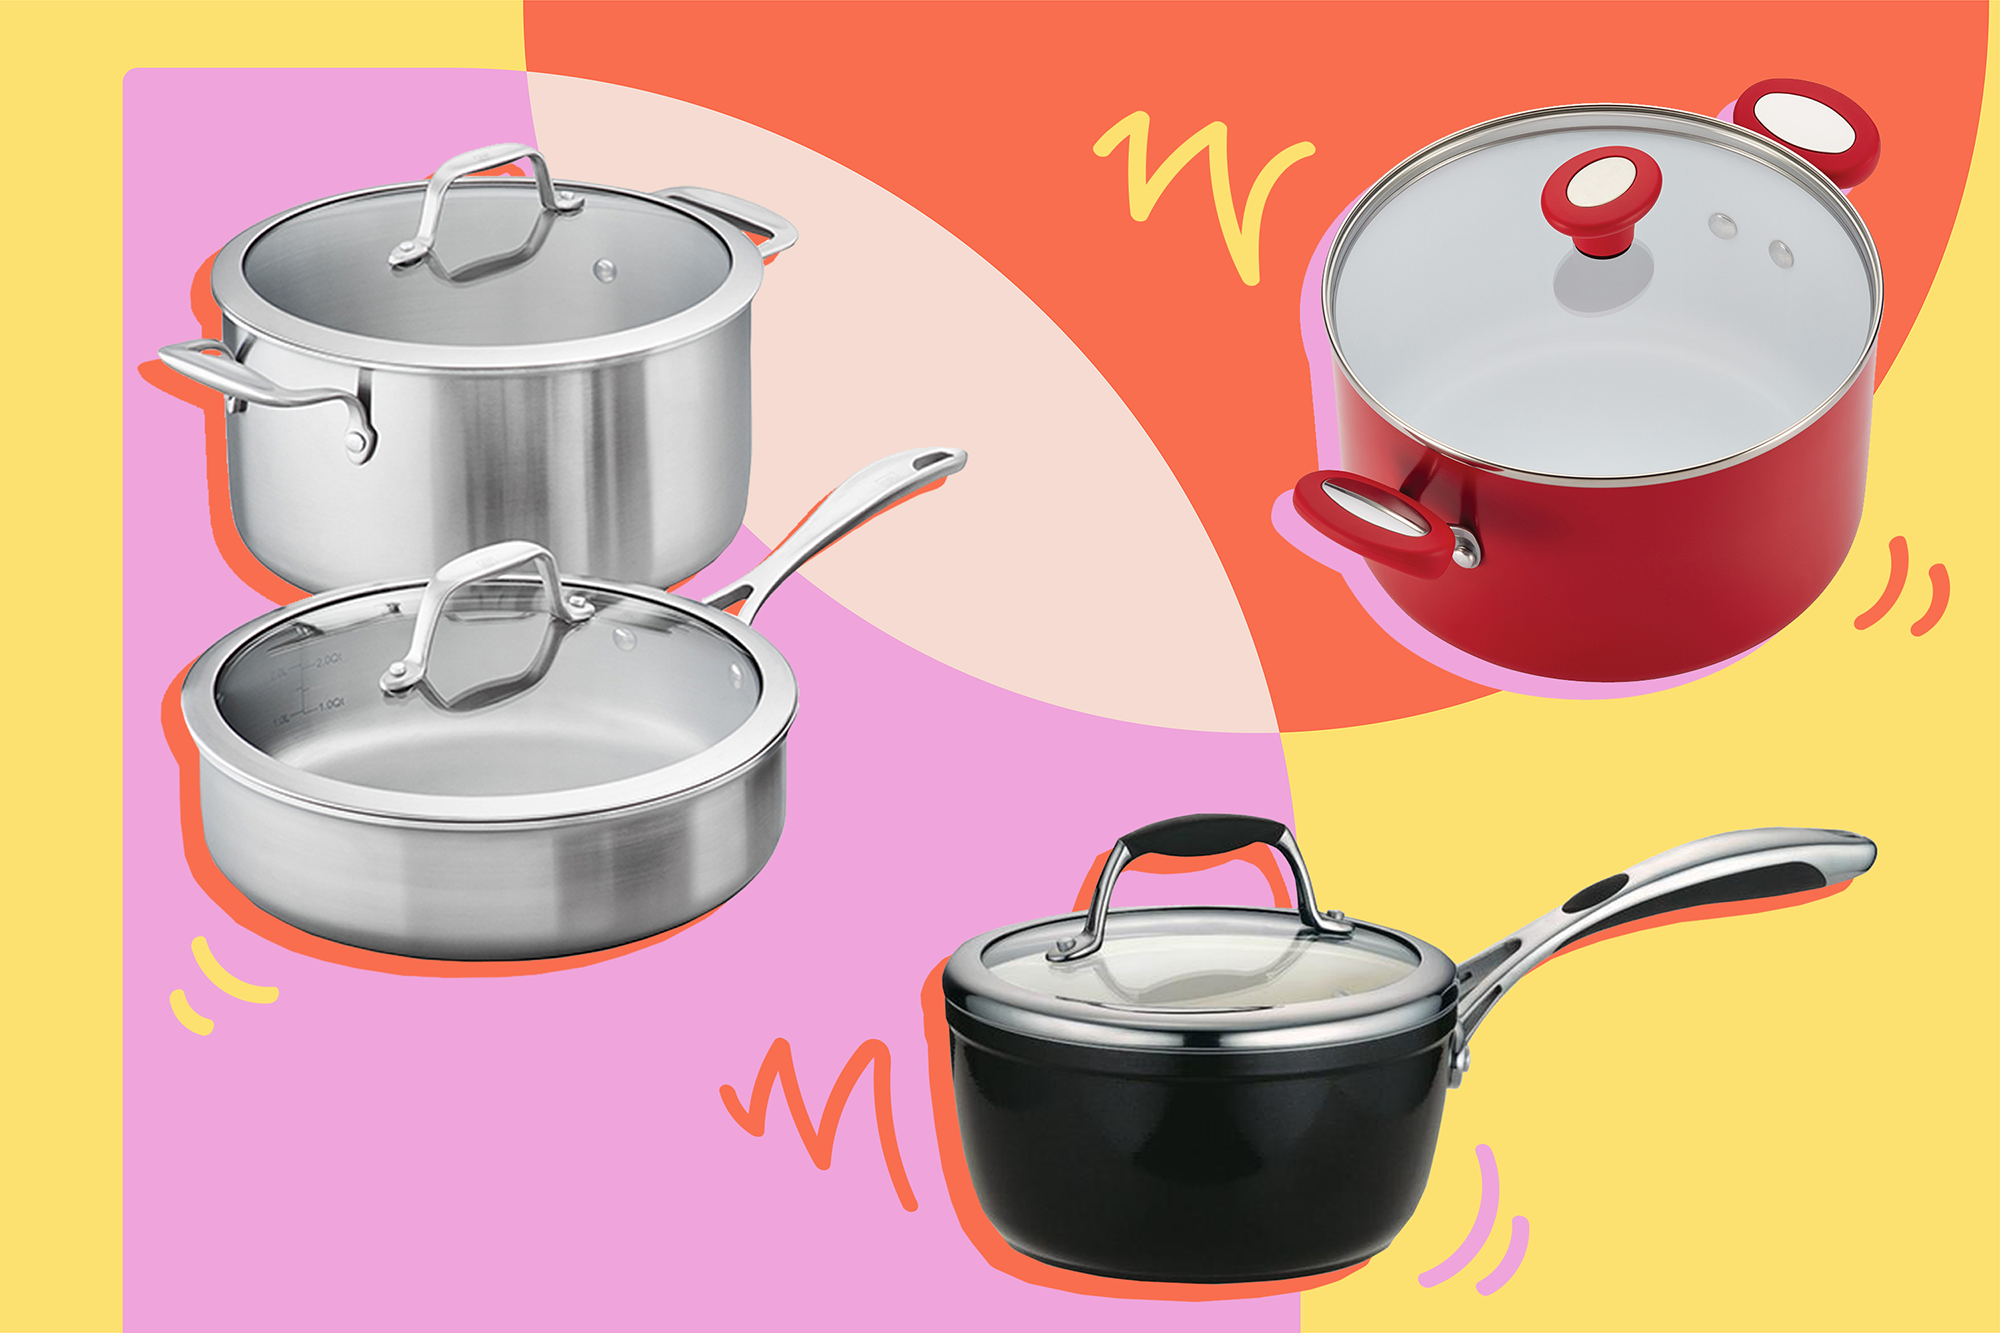 Is It Safe To Use Scratched Nonstick Pans? Here's What Experts Say